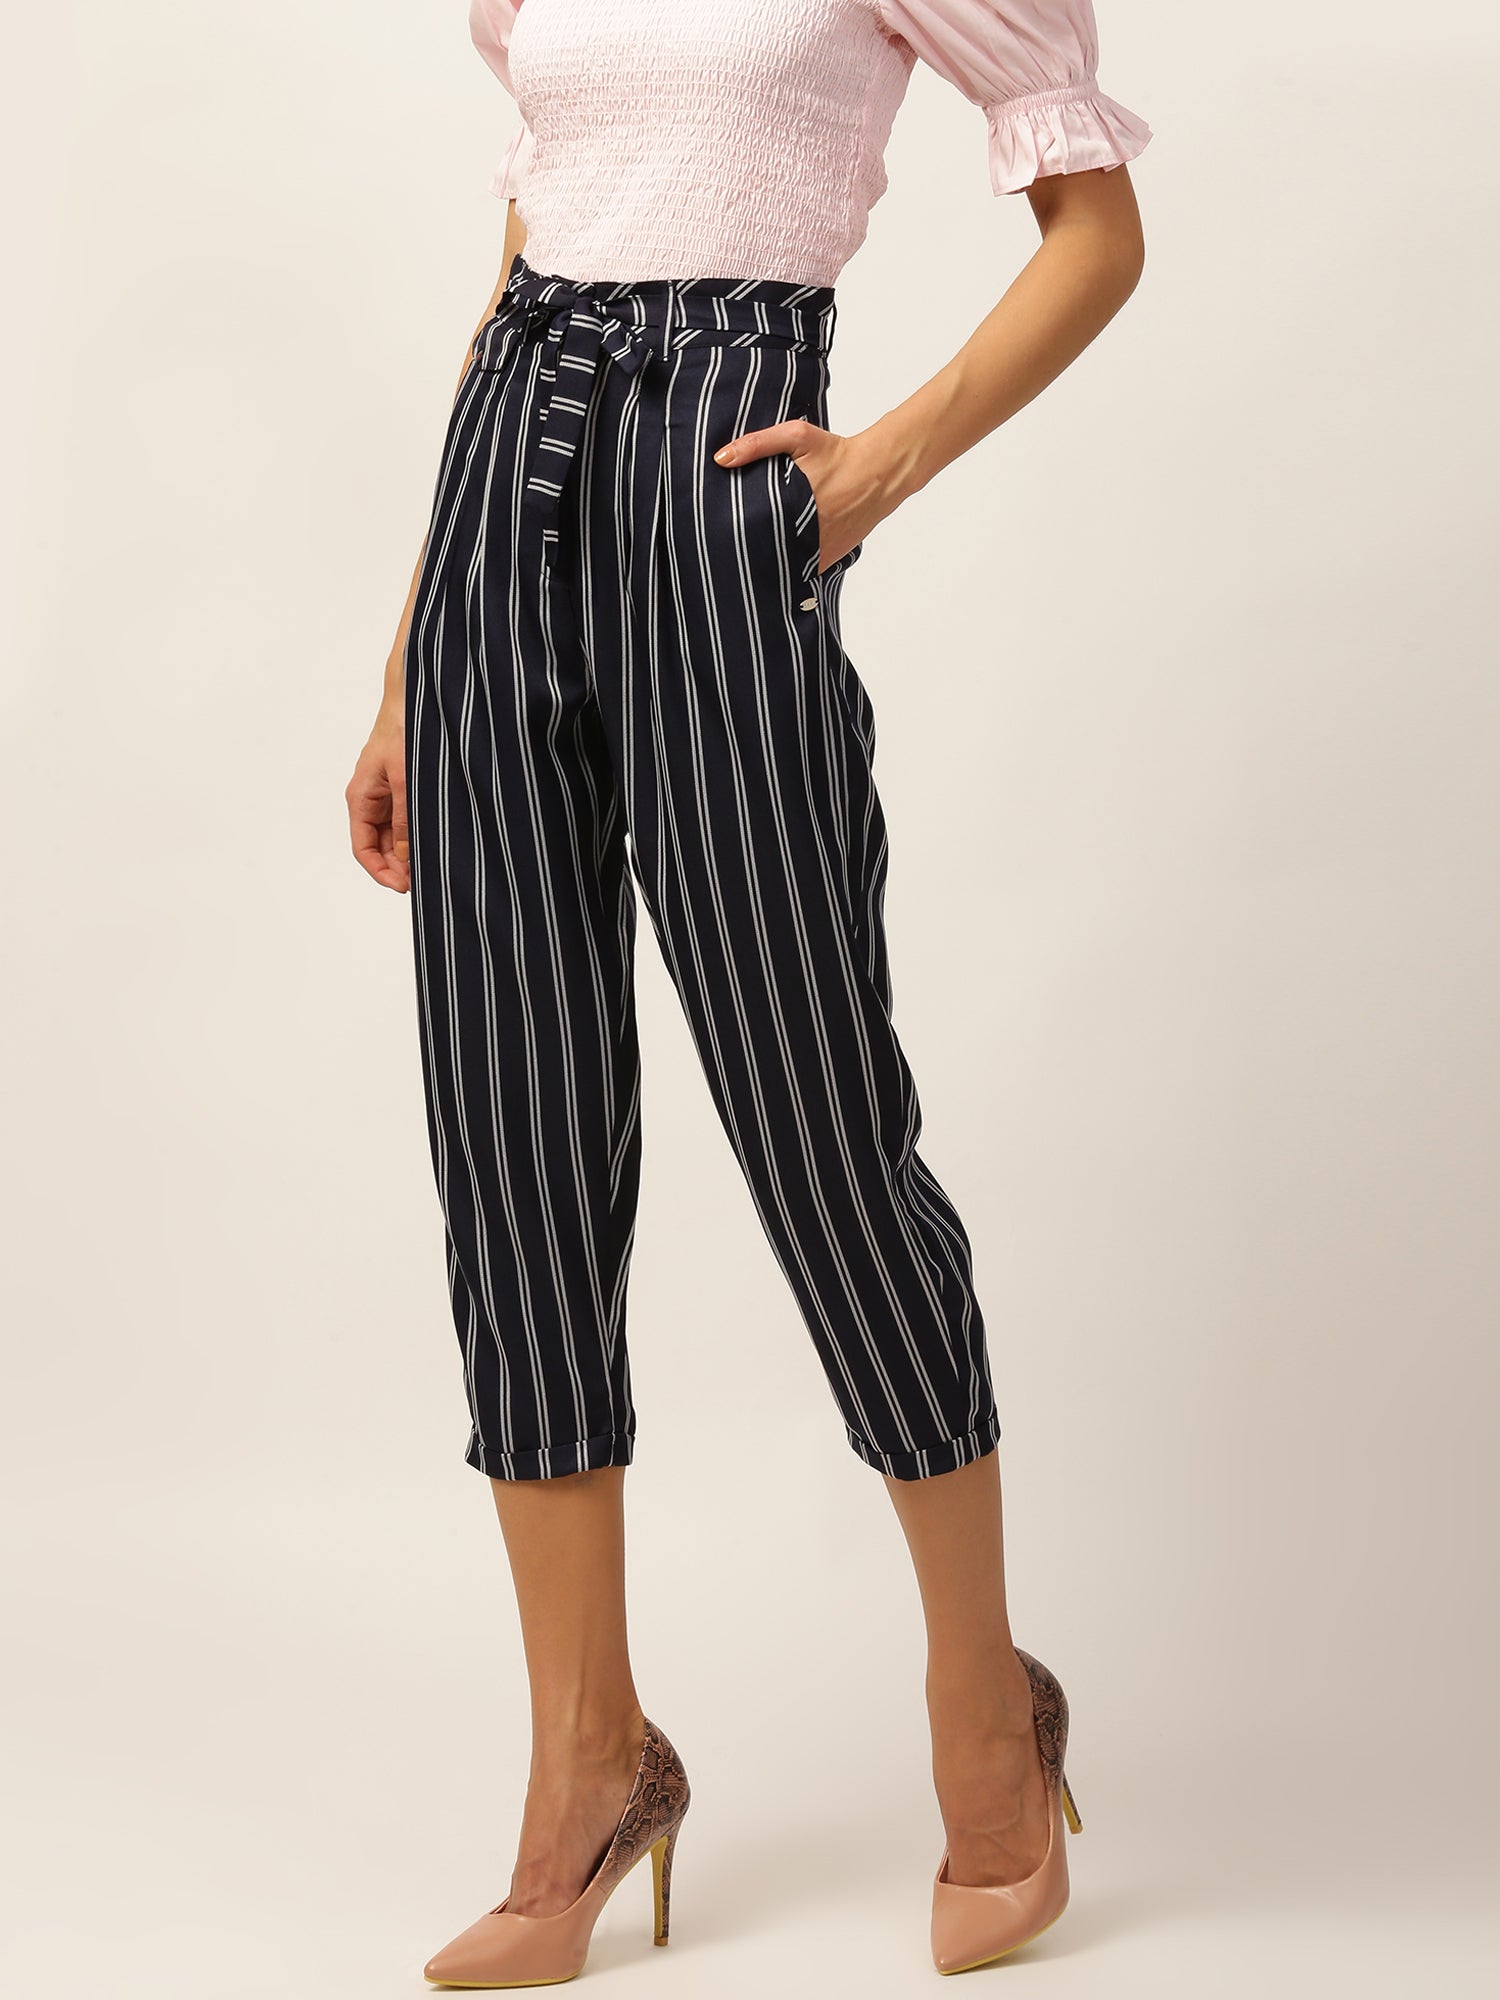 Striped Paperbag Pants | ShopStyle